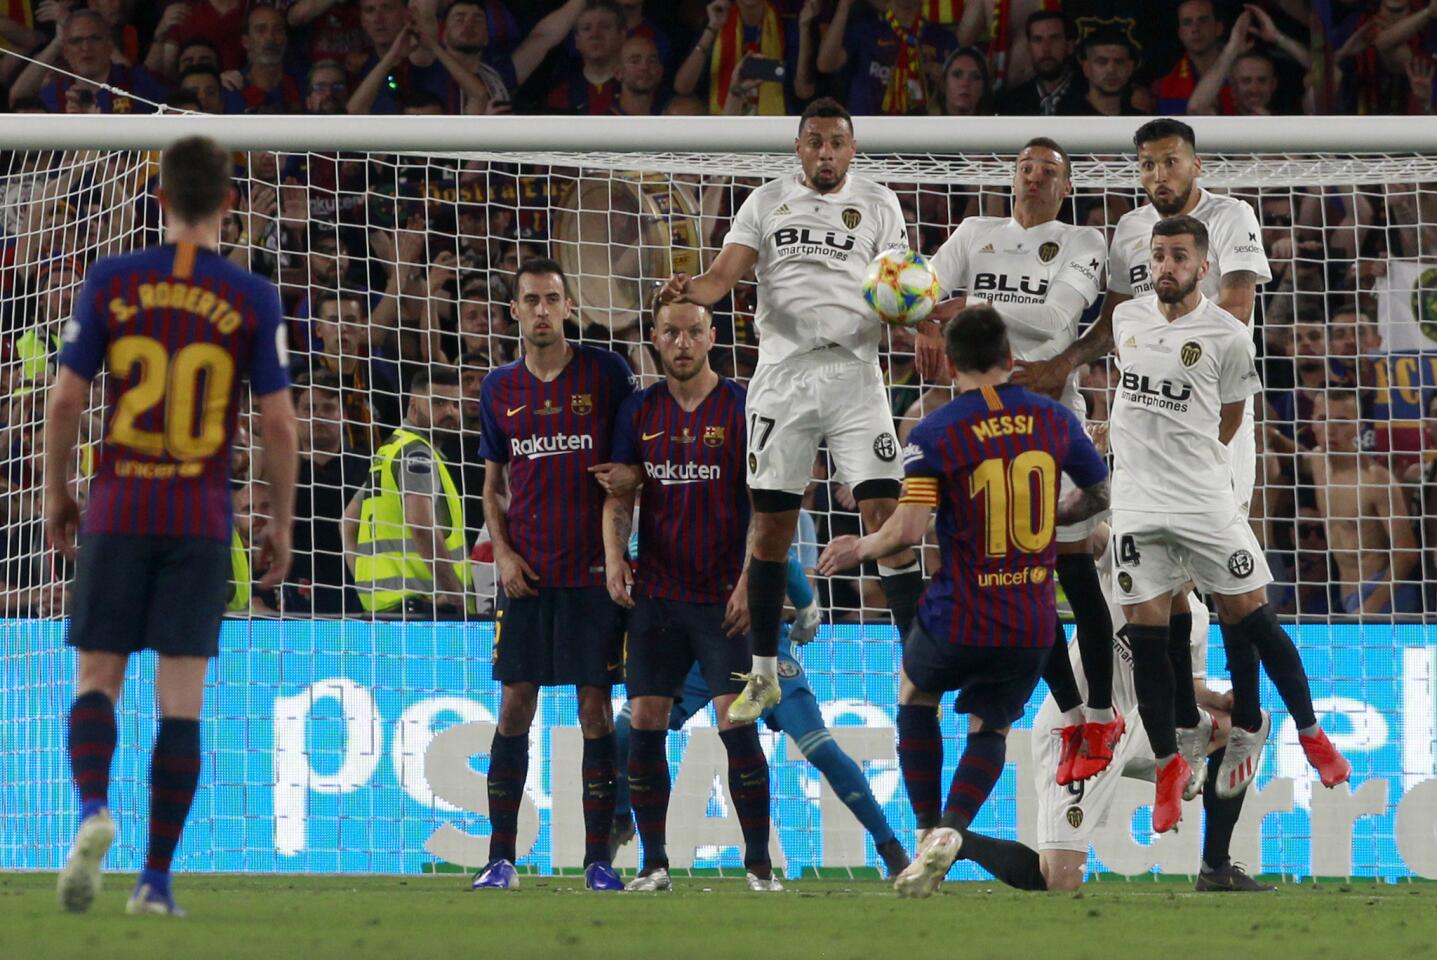 Barcelona forward Lionel Messi takes a free kick during the Copa del Rey soccer match final between Valencia CF and FC Barcelona at the Benito Villamarin stadium in Seville, Spain, Saturday. 25, 2019.